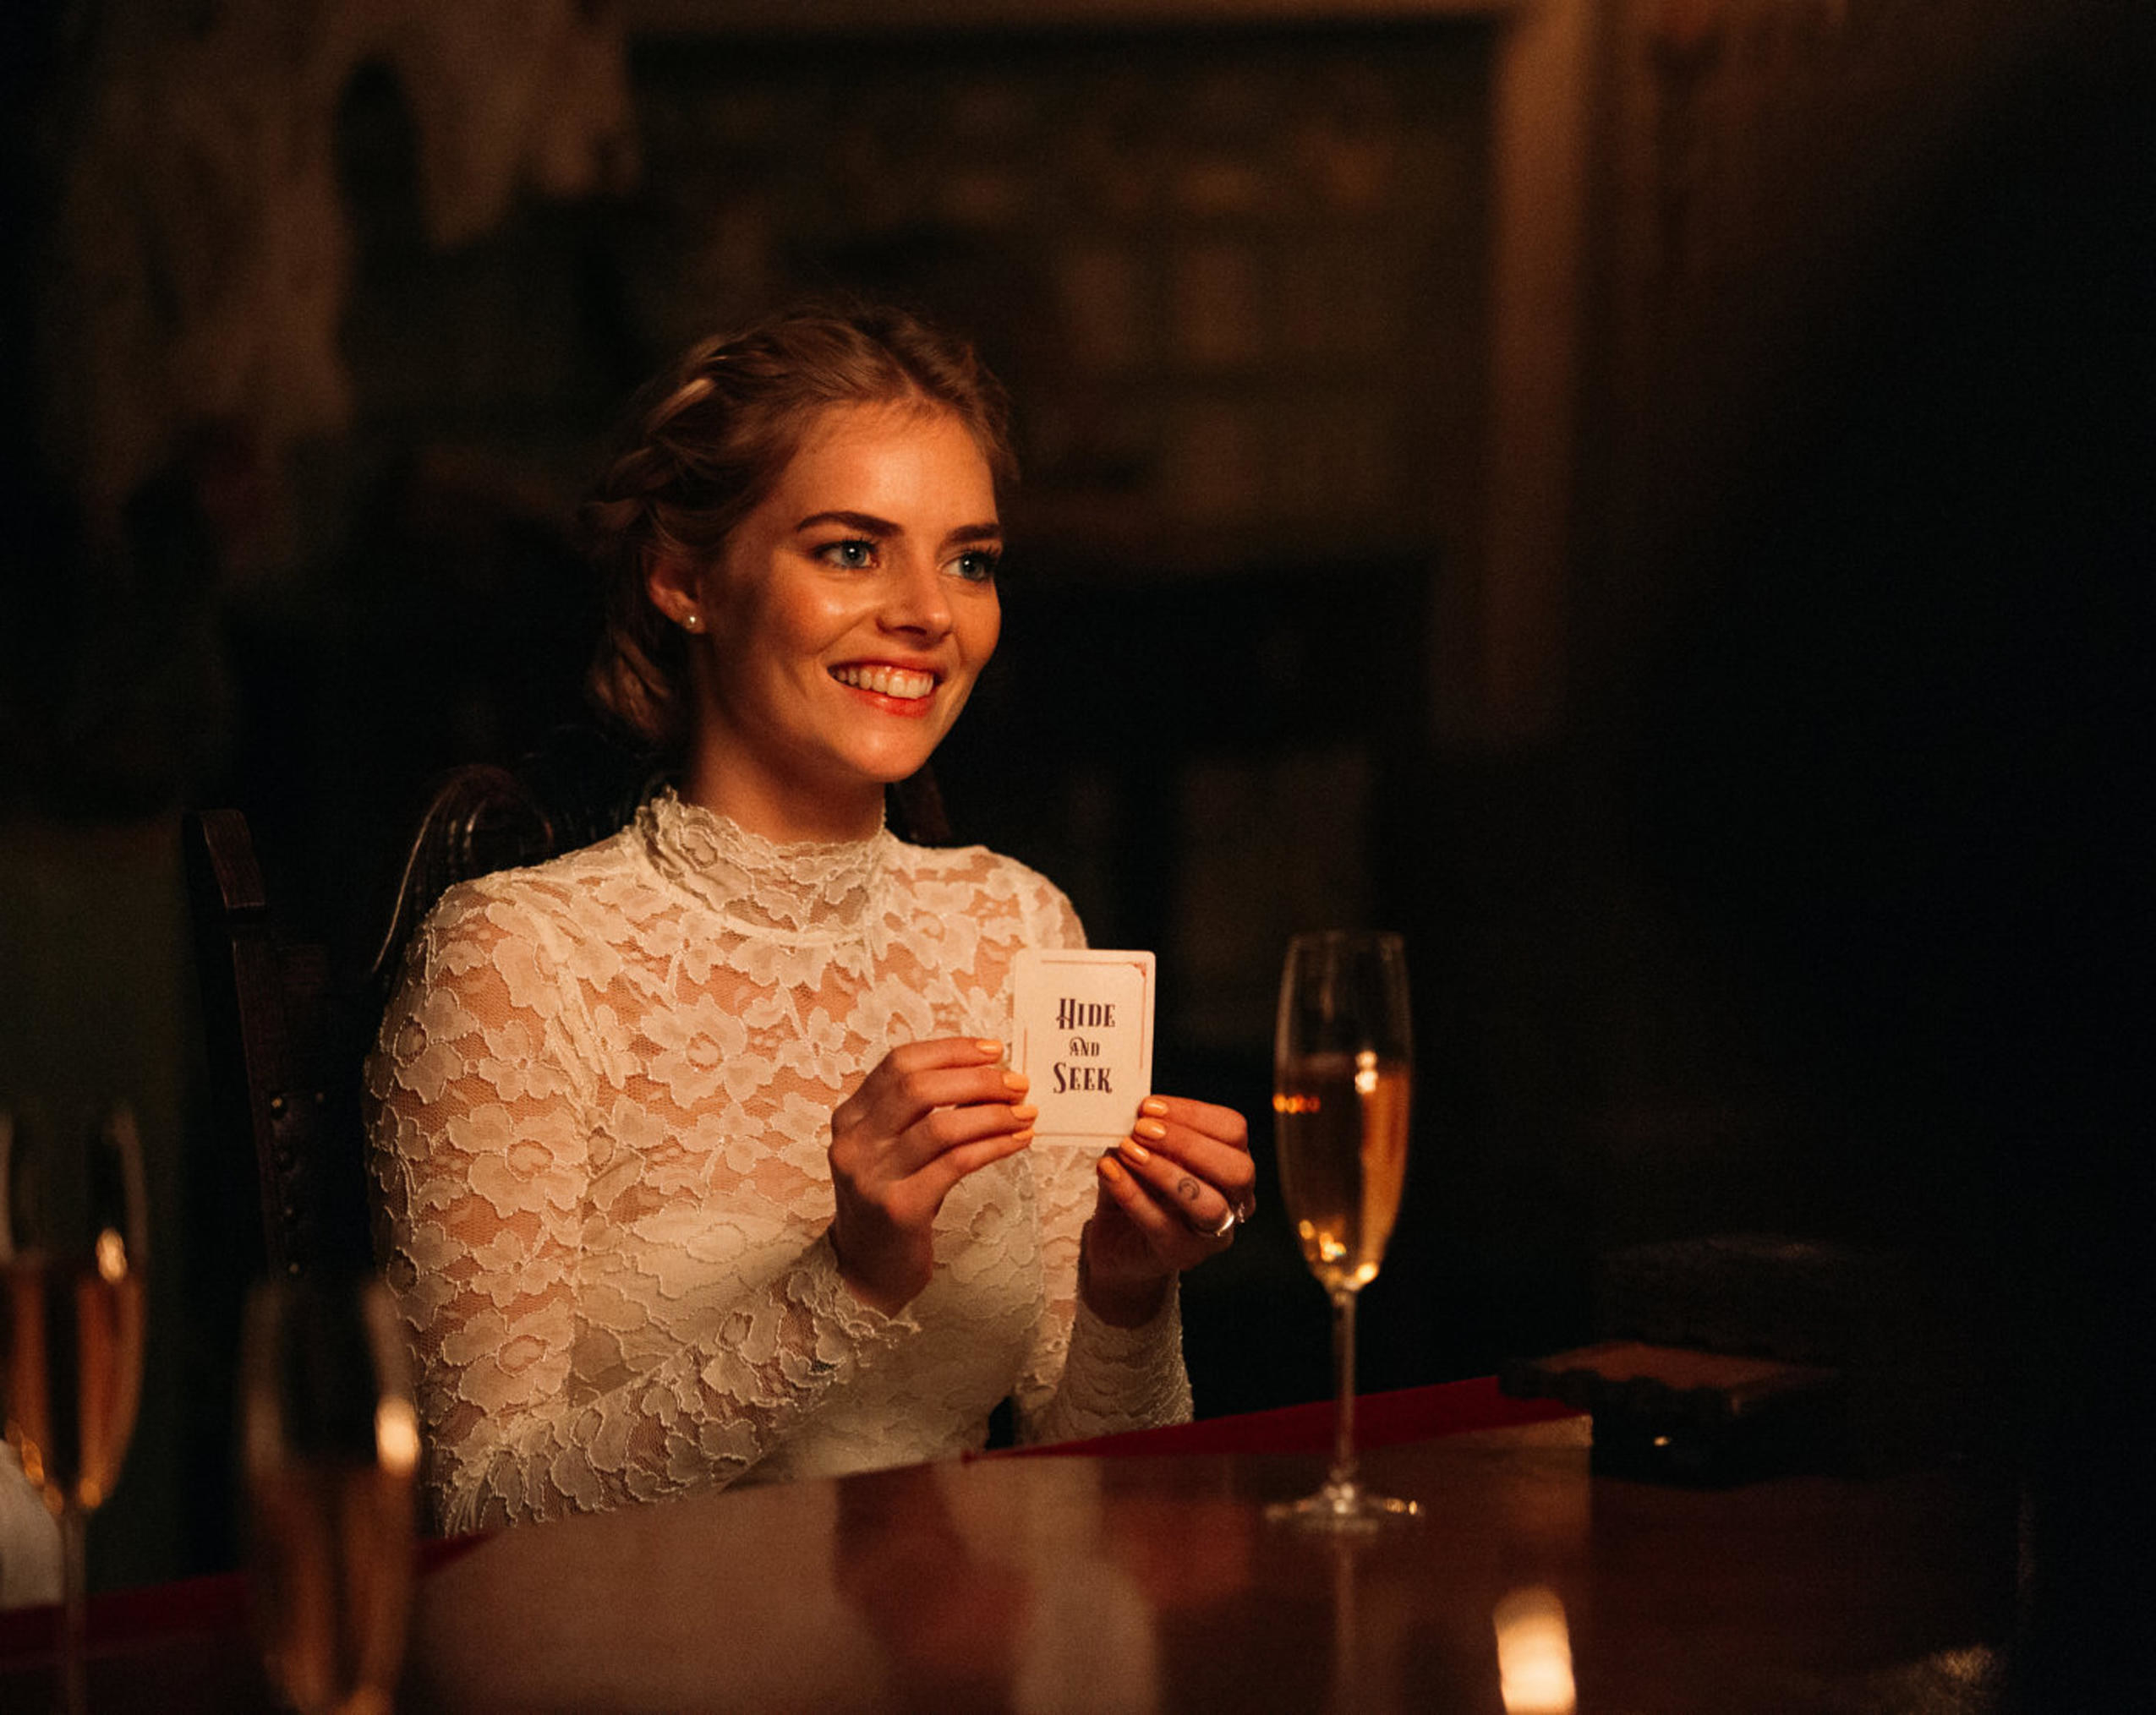 Samara Weaving in a wedding dress smiles and holds up a novelty card